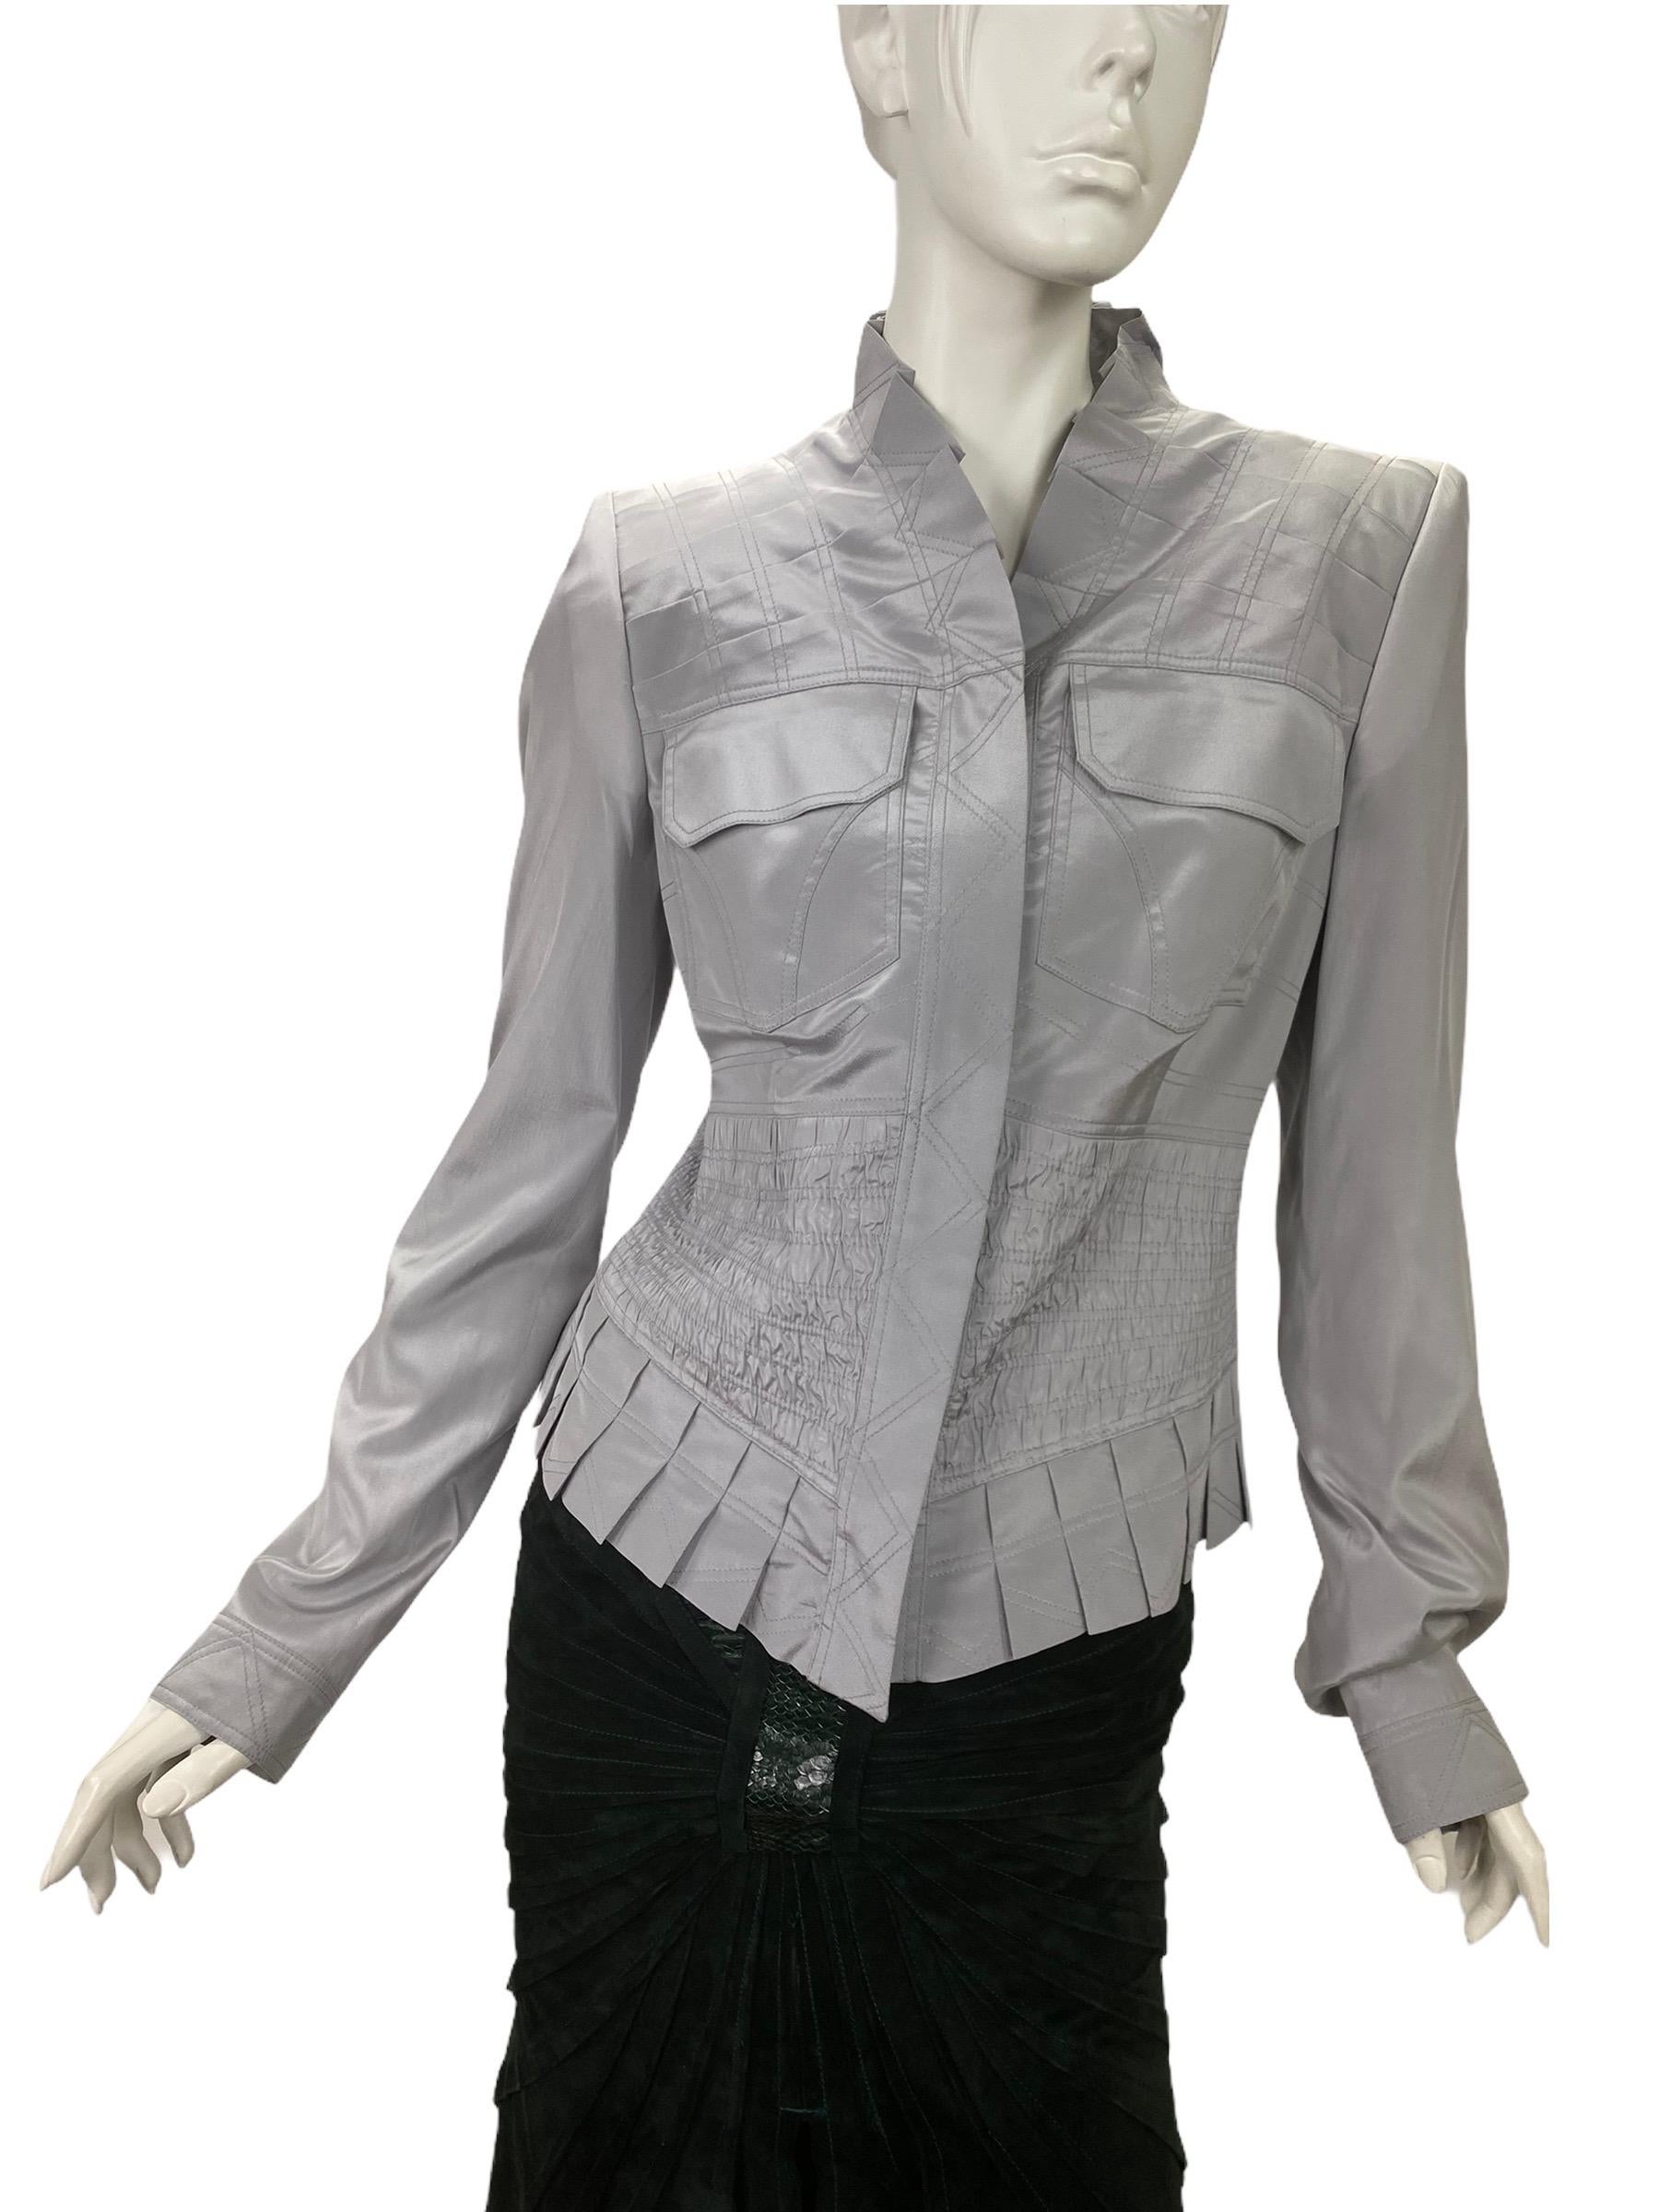 S/S 2004 Vintage Runway Tom Ford for Gucci Dove Grey Silk Jacket

IT Size 44

90% Silk, 10% Spandex

New, in immaculate condition with tags attached.

